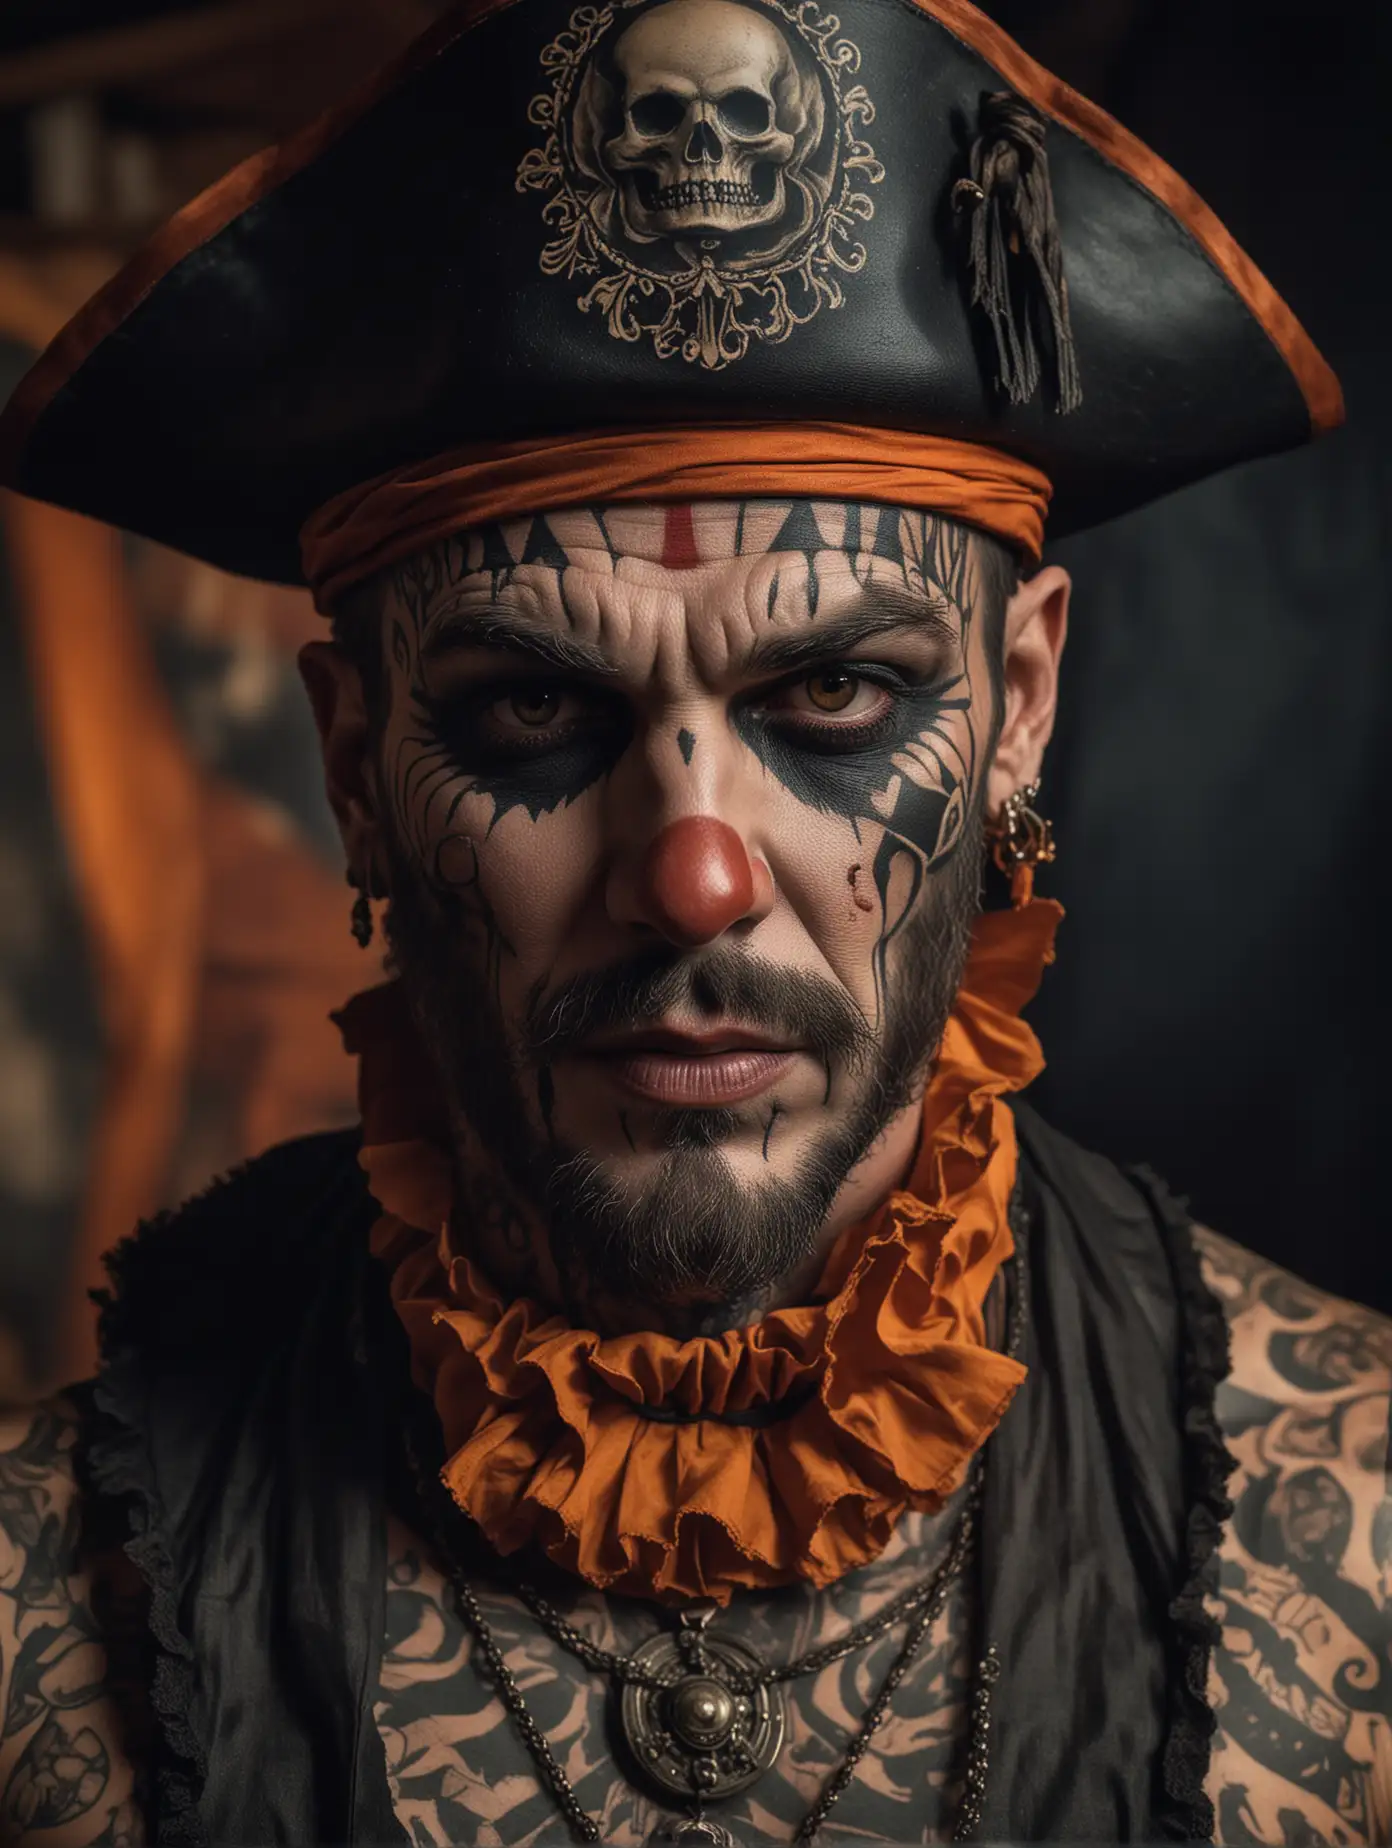 close up upper body portrait, highly detailed, sinister, macabre, circus clown, in the style of a 1960's horror movie, eerie symbolism, sinister dark atmosphere, black and orange palette, close up portraiture, well built male, wearing a pirate themed outfit, pirate hat, covered in tattoos, inside a circus tent, nature-inspired pieces, circus costumes, ultra details